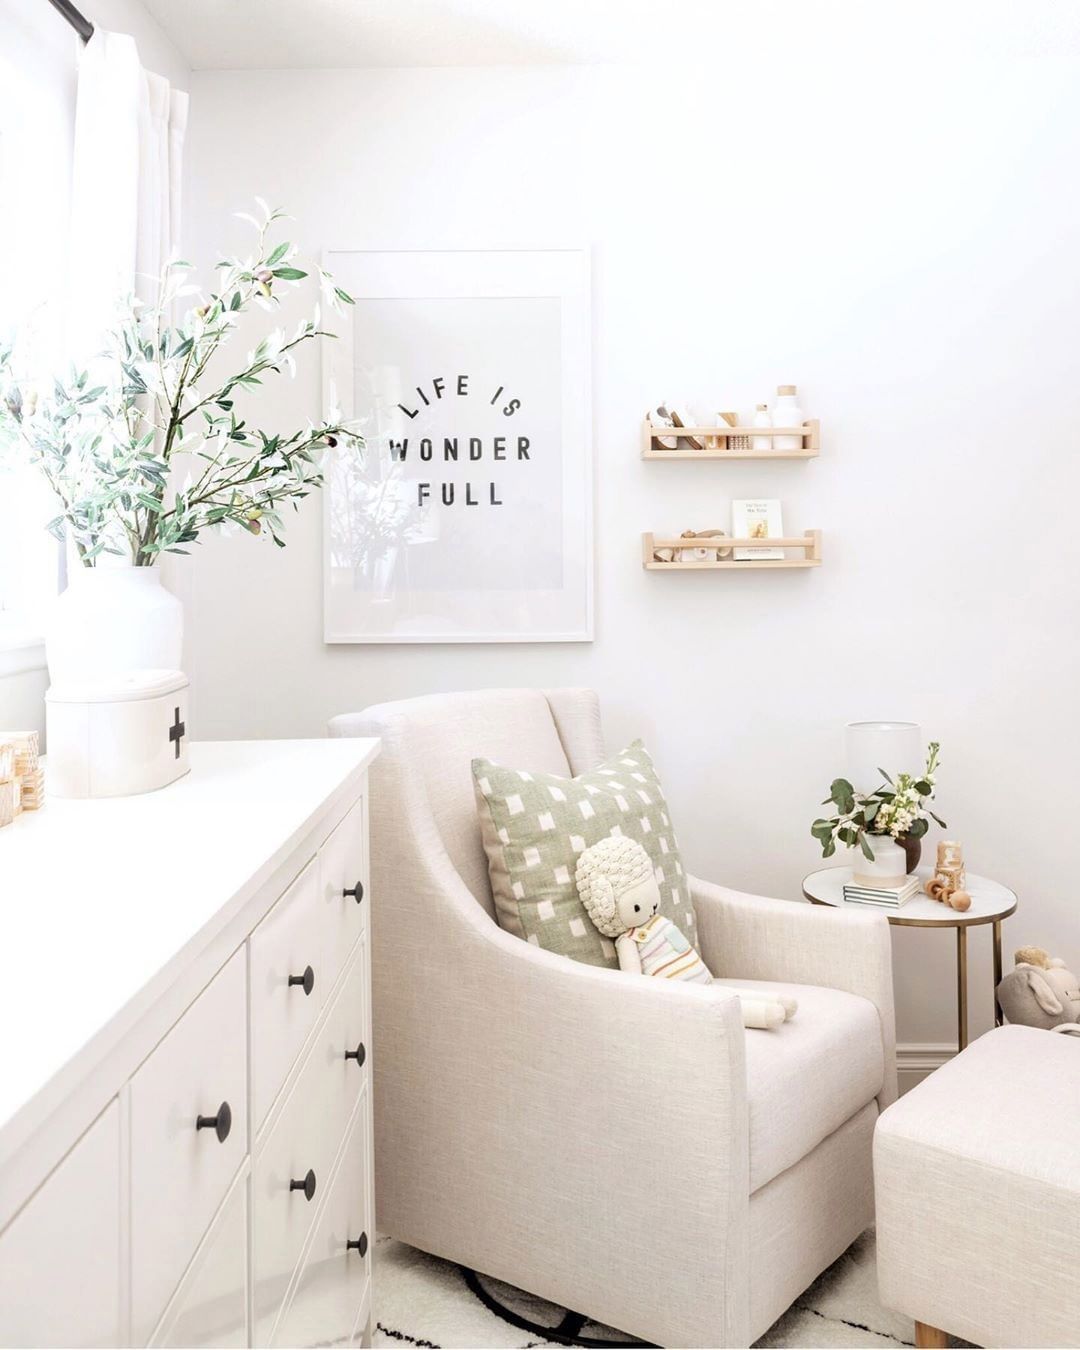 HOW TO BRING A NATURAL VIBE TO THE NURSERY – Kids Interiors